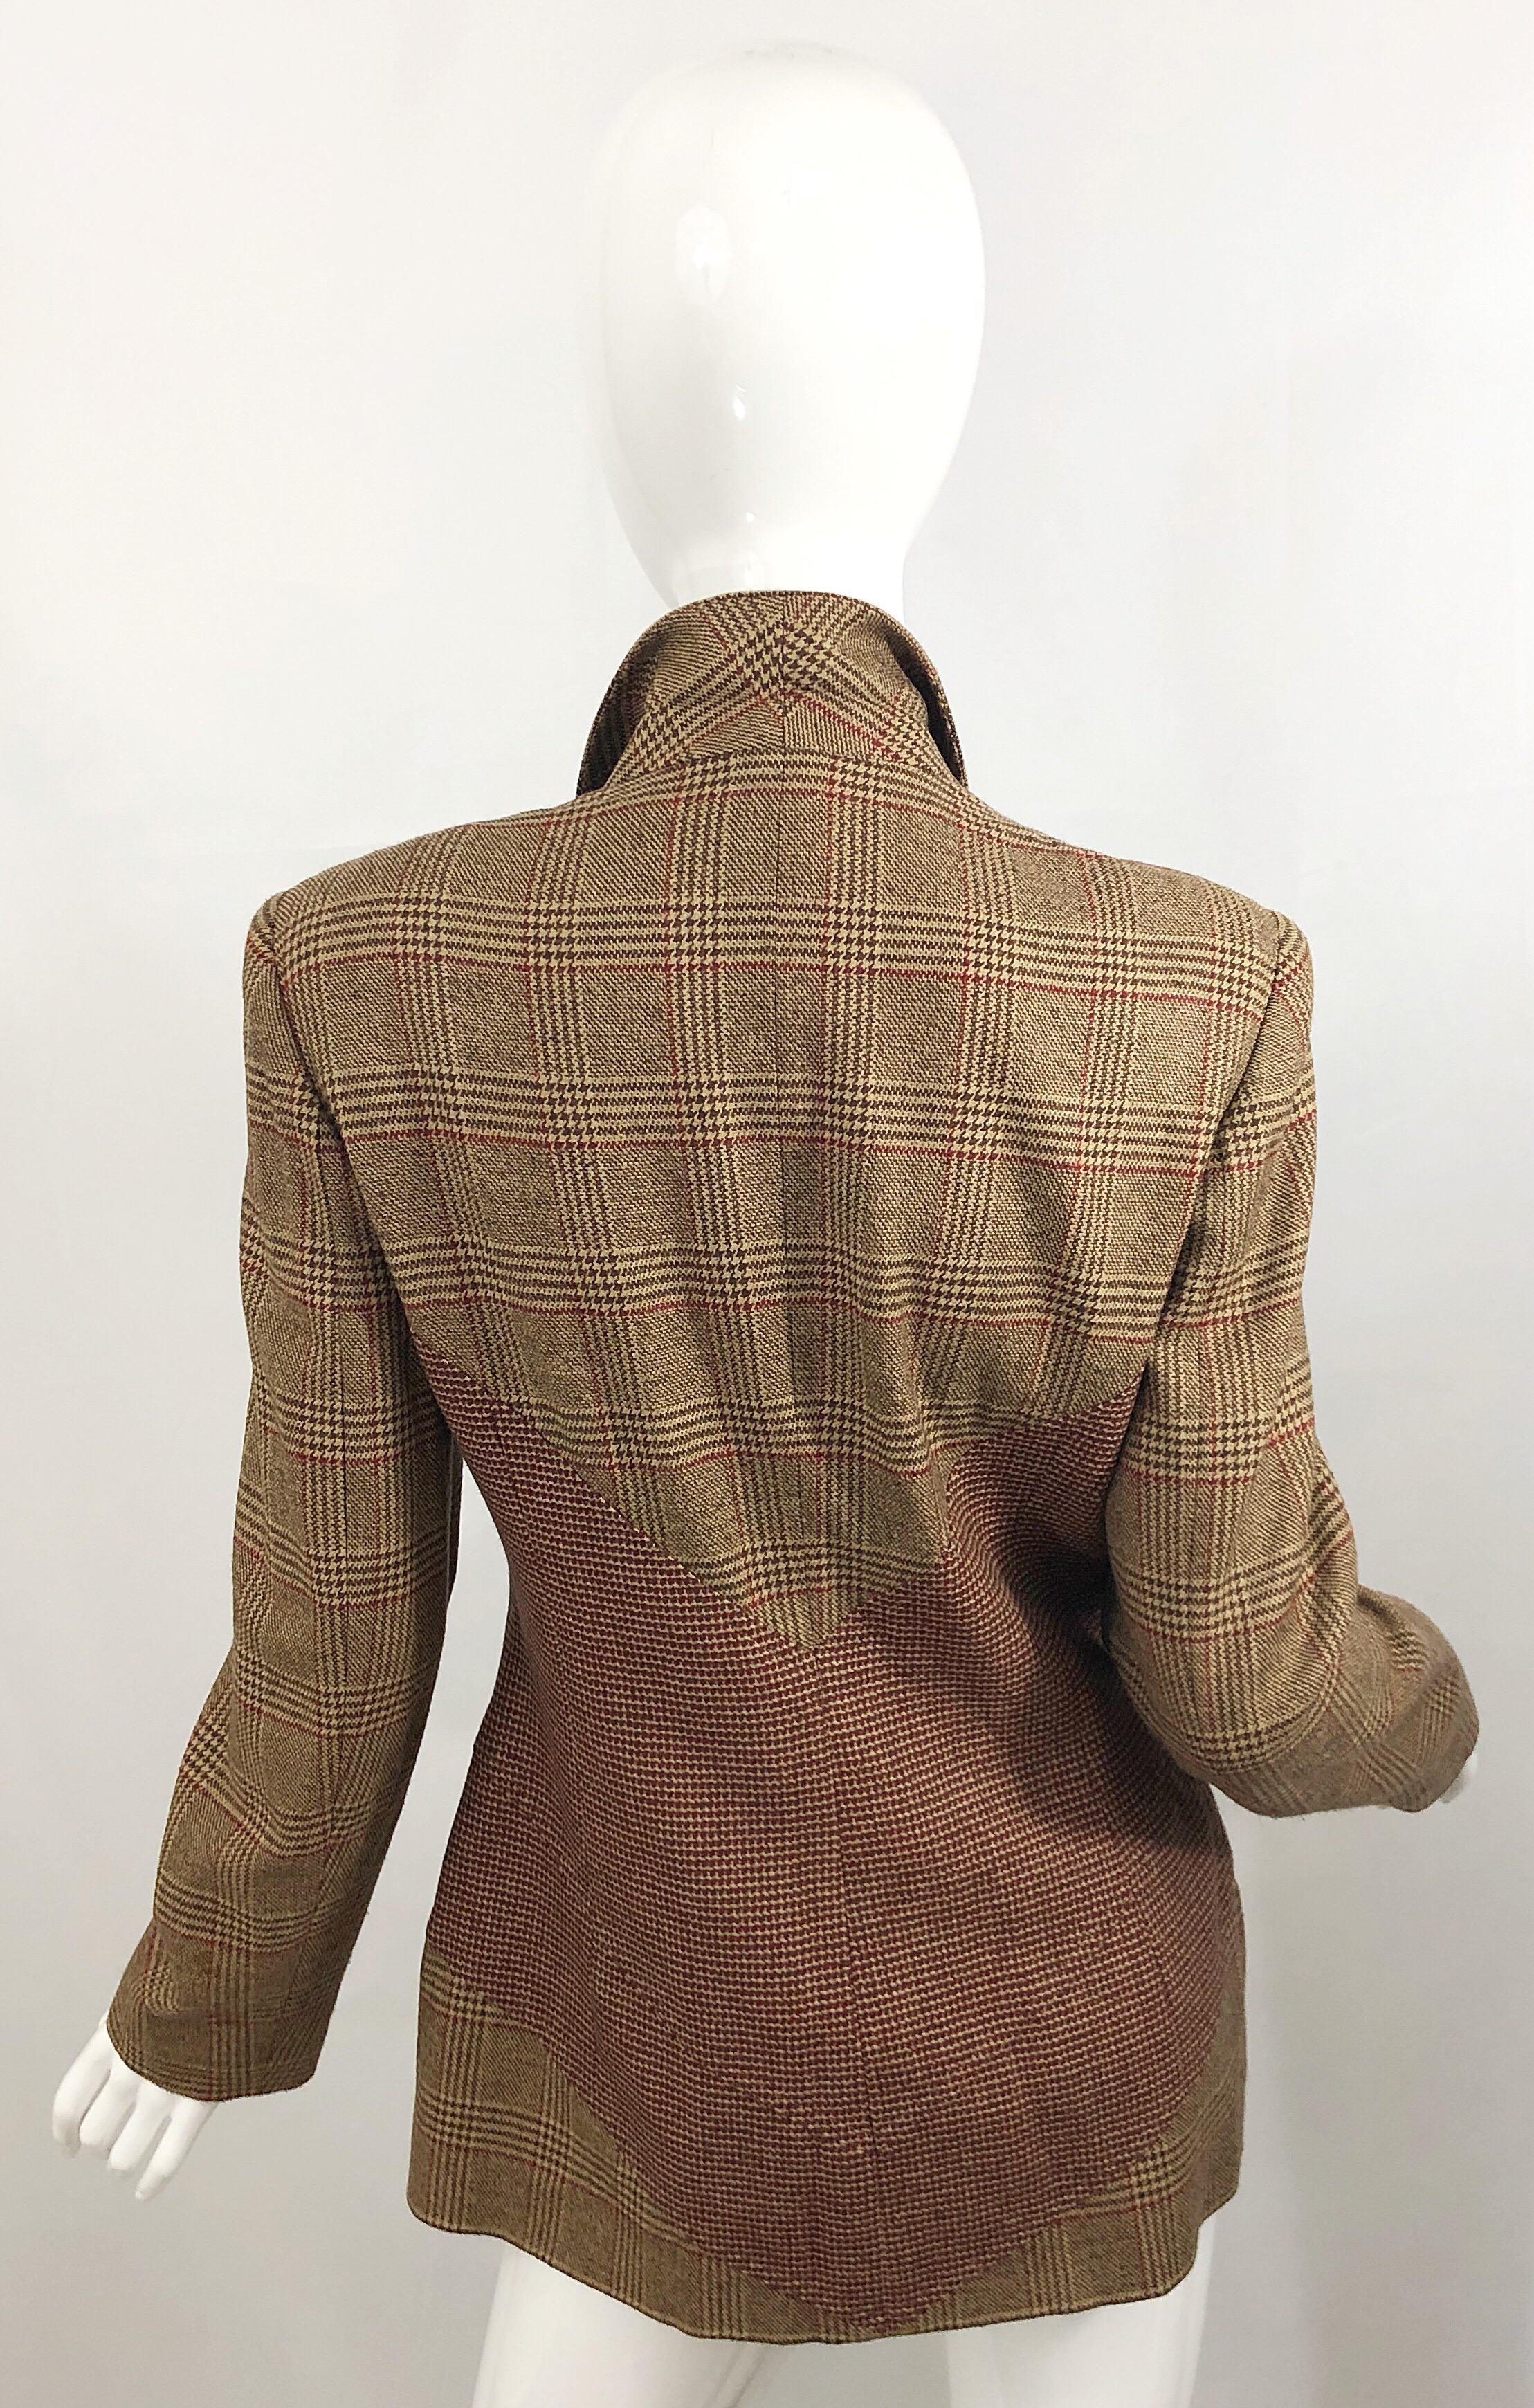 Avant Garde 90s ANGELO TARLAZZI double breasted vintage blazer jacket! Features brown and maroon / burgundy houndstooth and plaid throughout. Flattering and slimming contrasting print at waist. Buttons up the front. Pocket at each side of the hips.